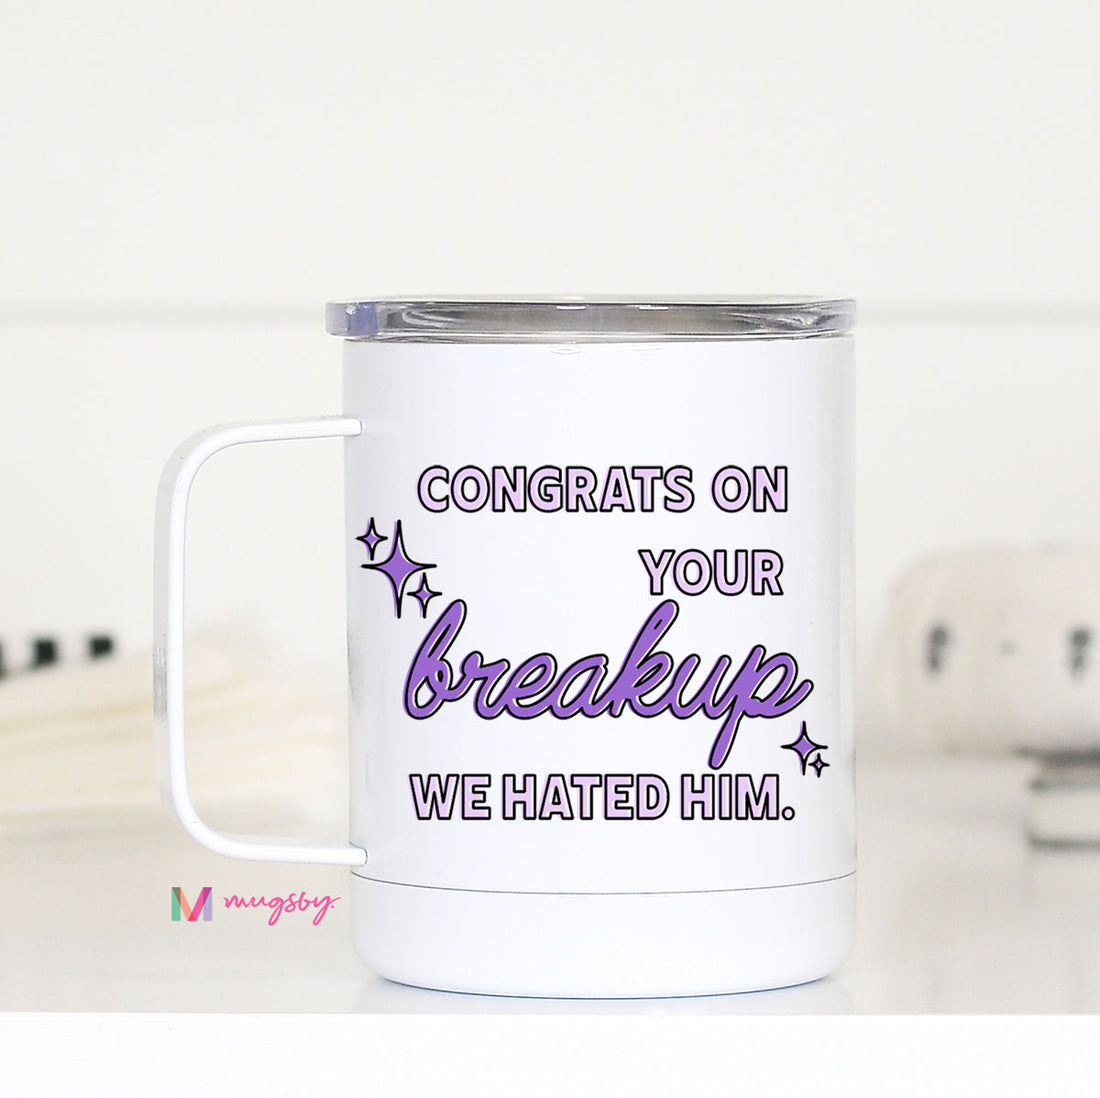 Congrats on your breakup we hated him travel mug